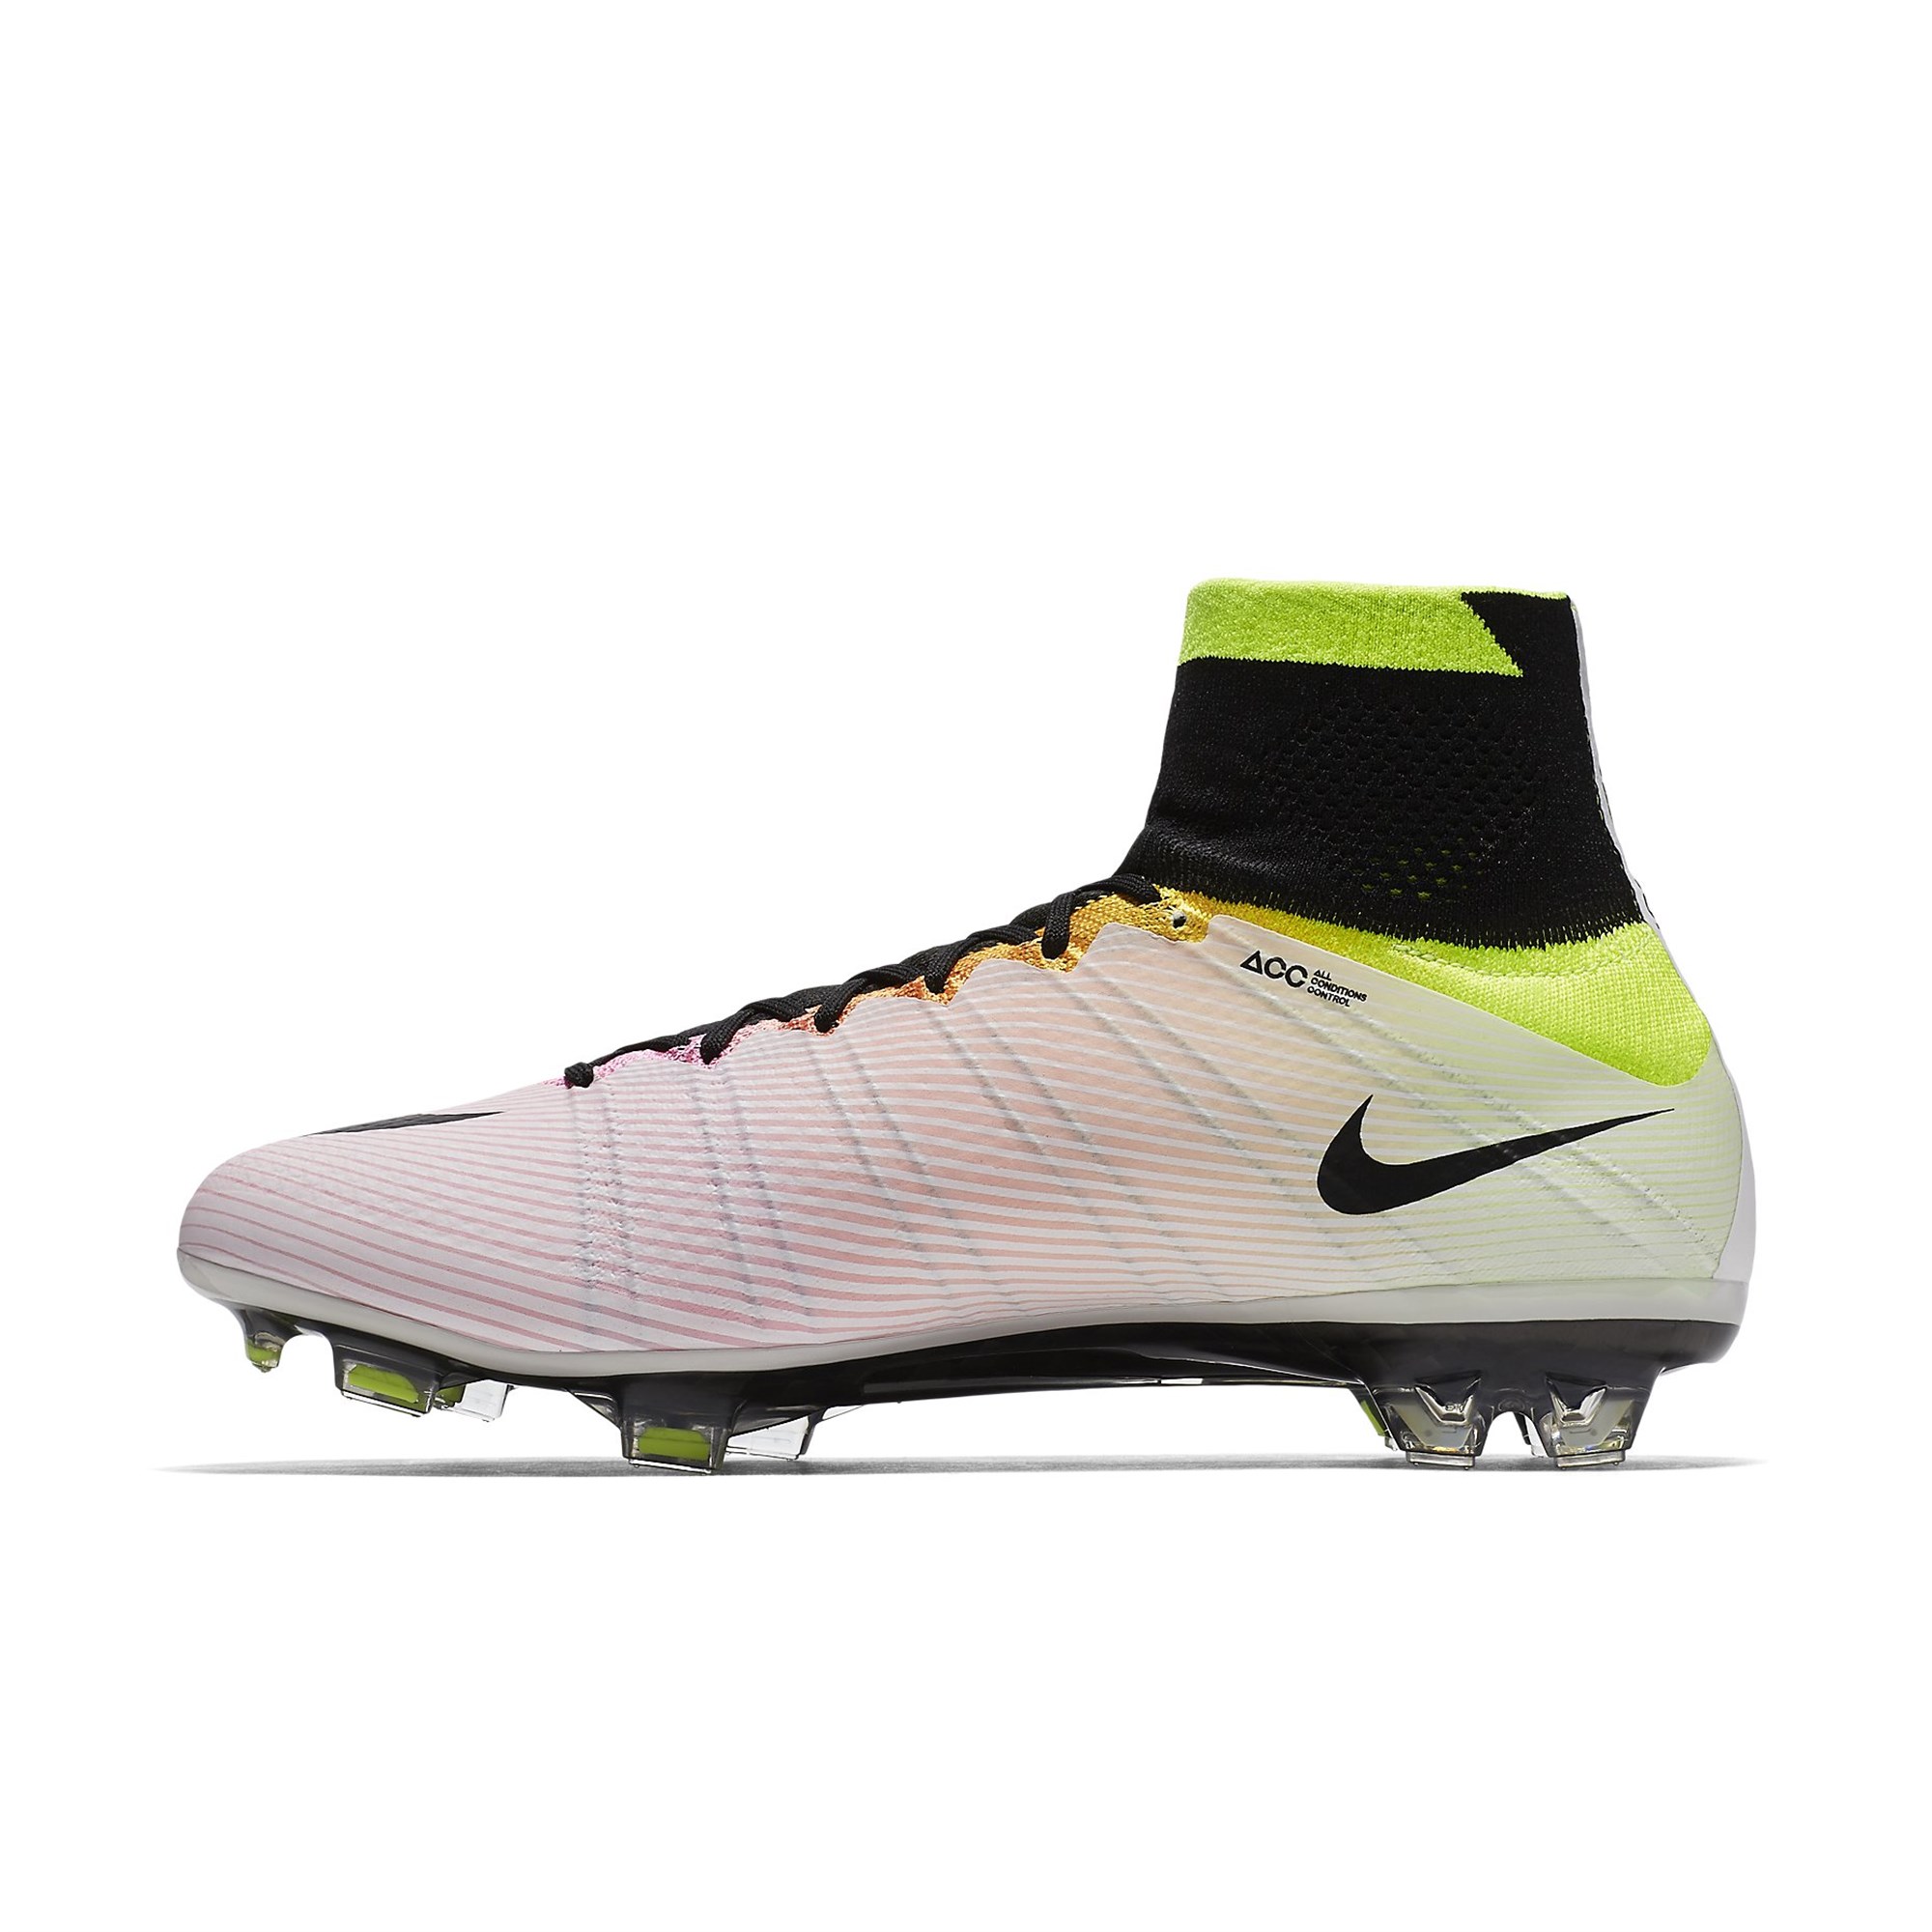 Nike Mercurial Buyers Guide Superfly, Vapor, Veloce & Victory